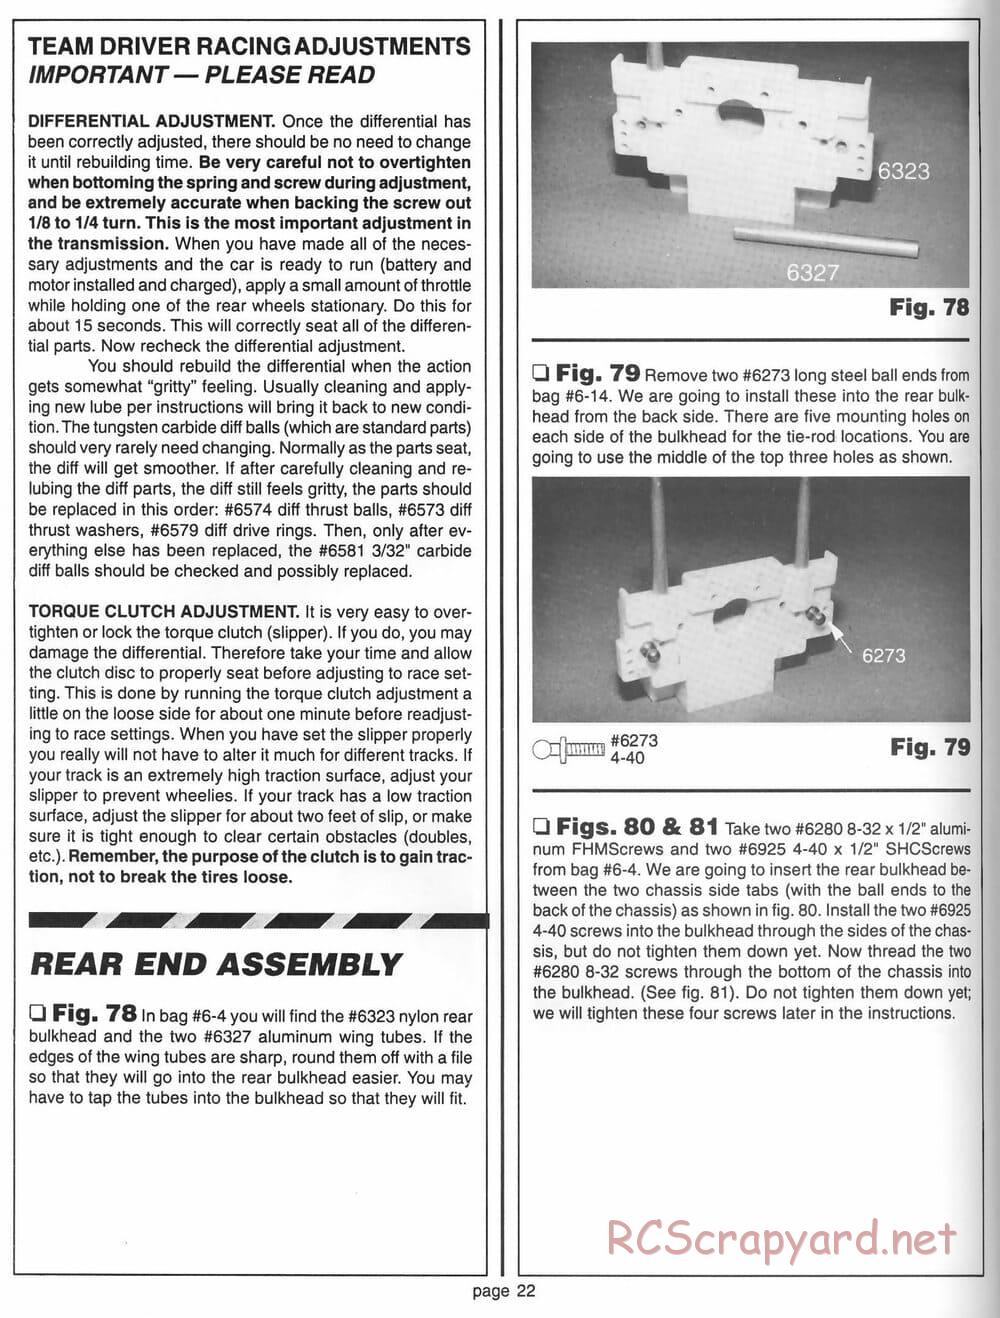 Team Associated - RC10 World's Car - 1994 - 6037 - Manual - Page 21